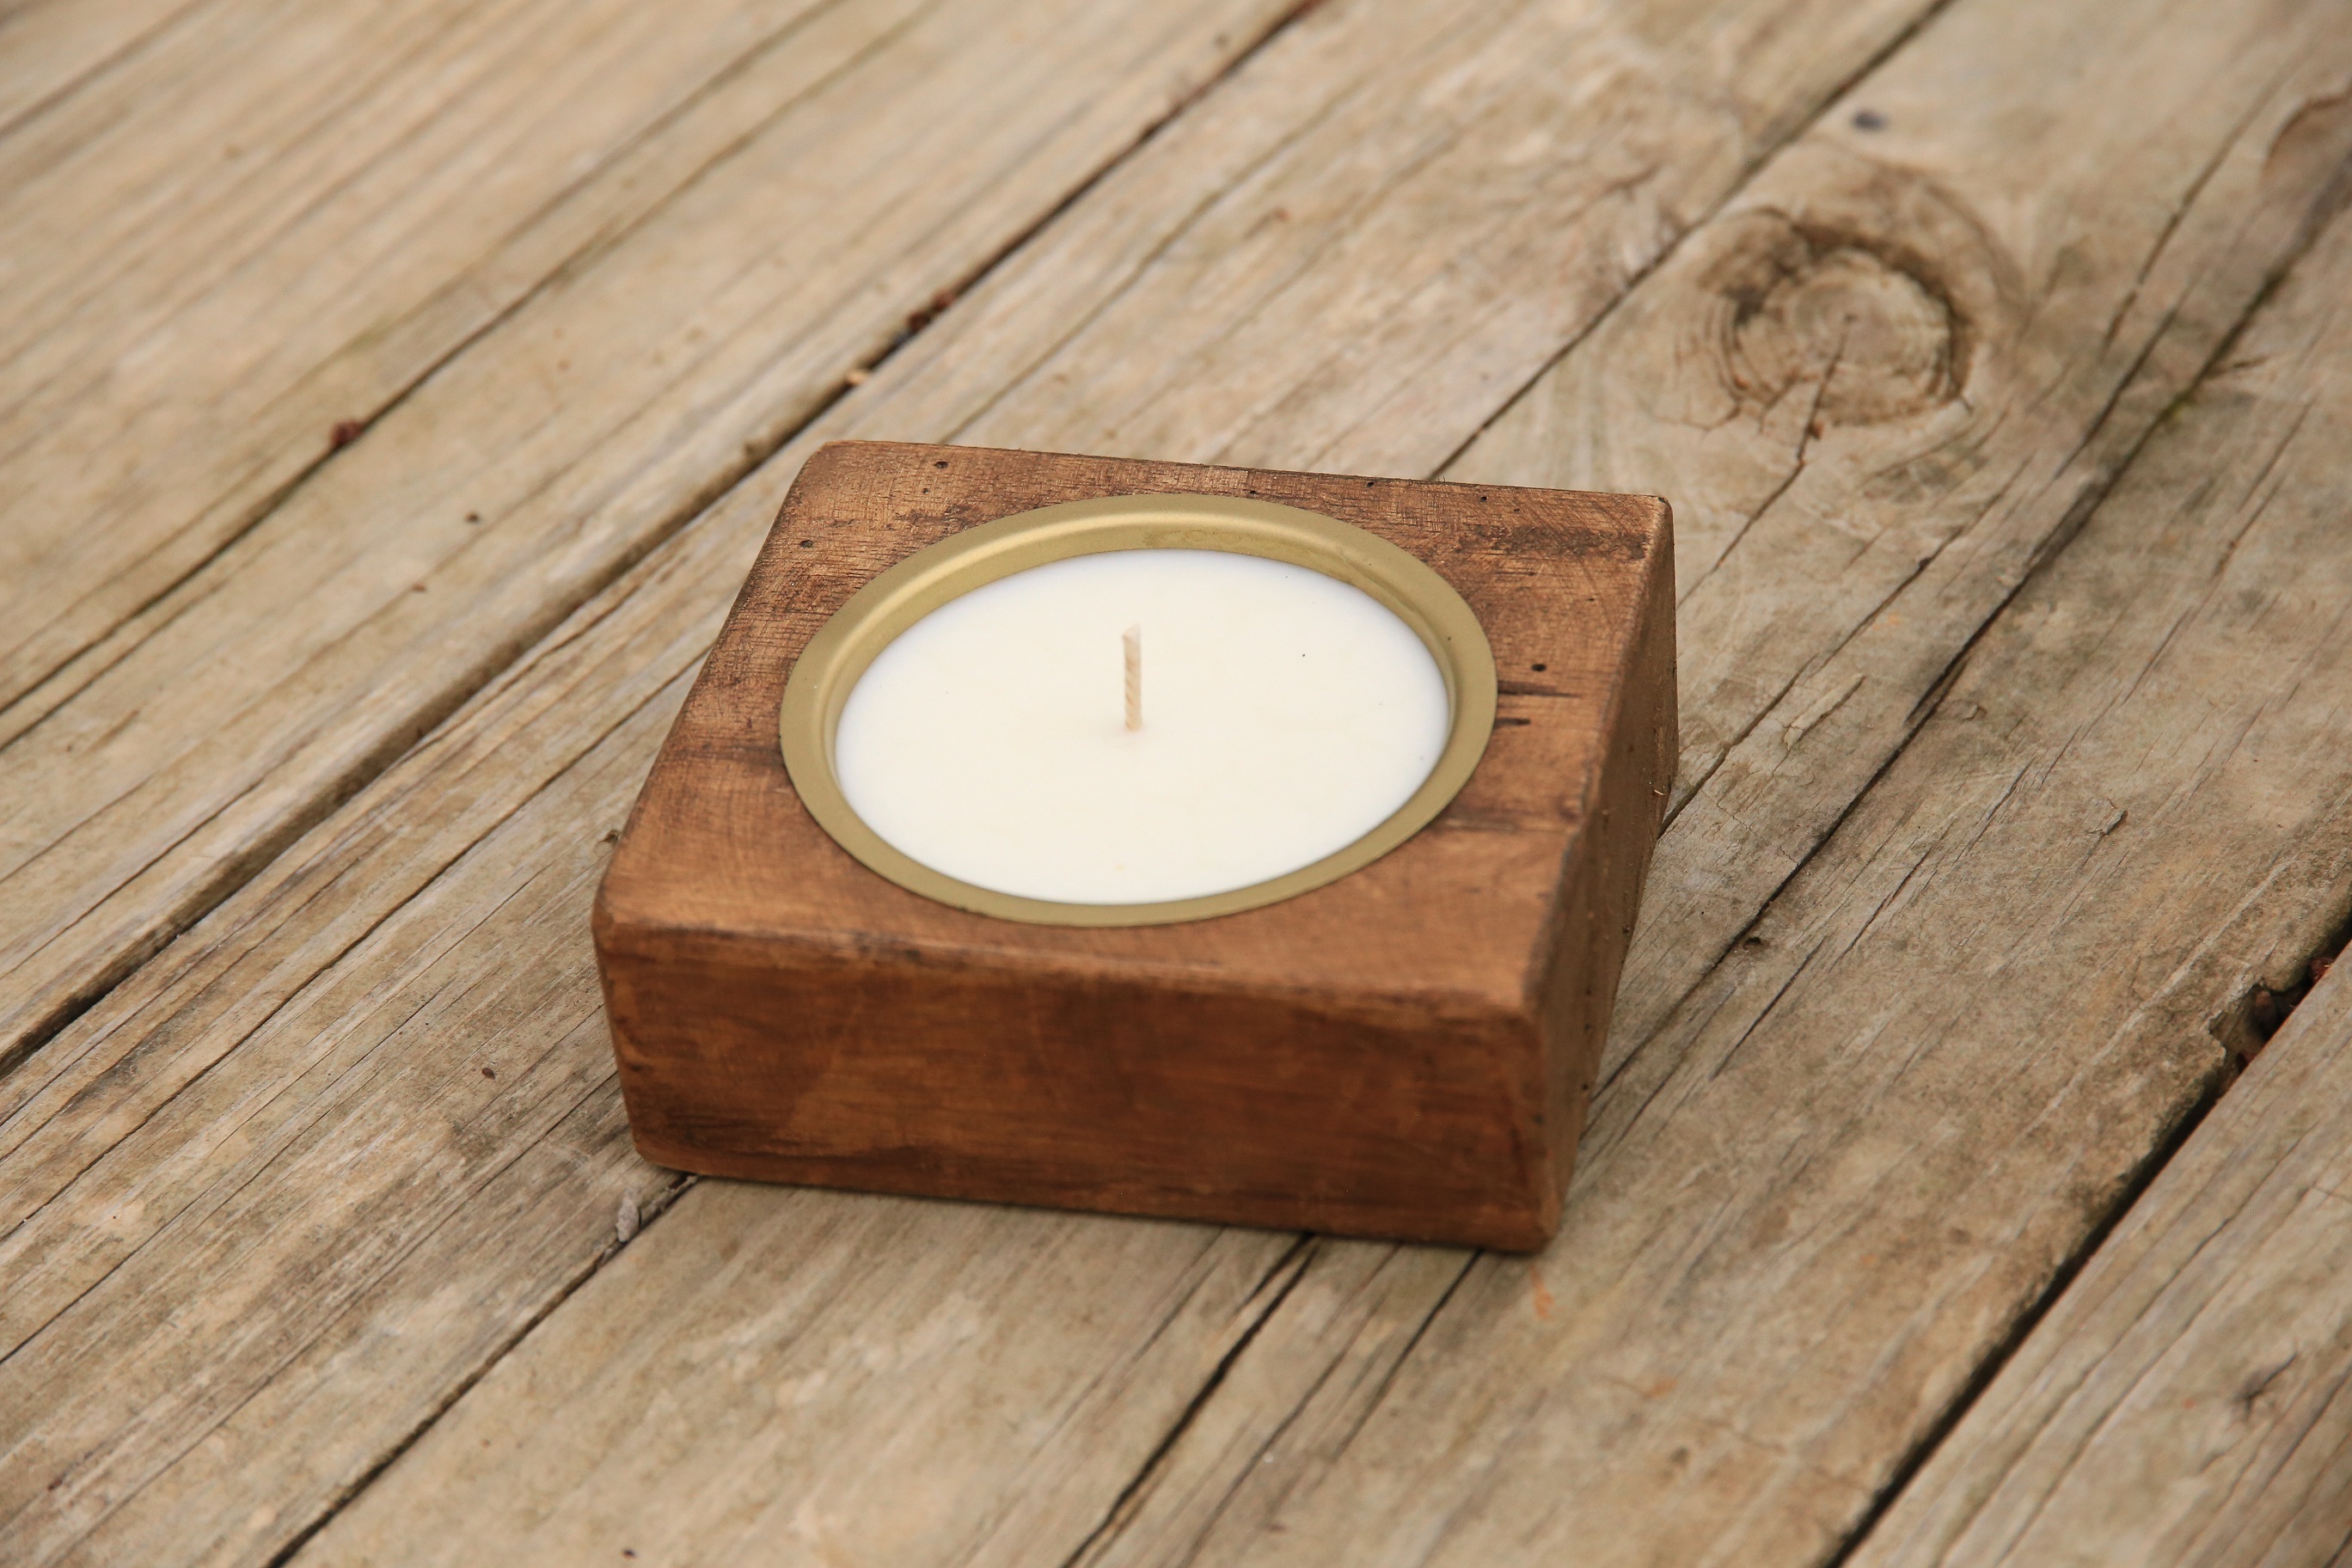 1 Hole Cheese mold Candle - Click Image to Close